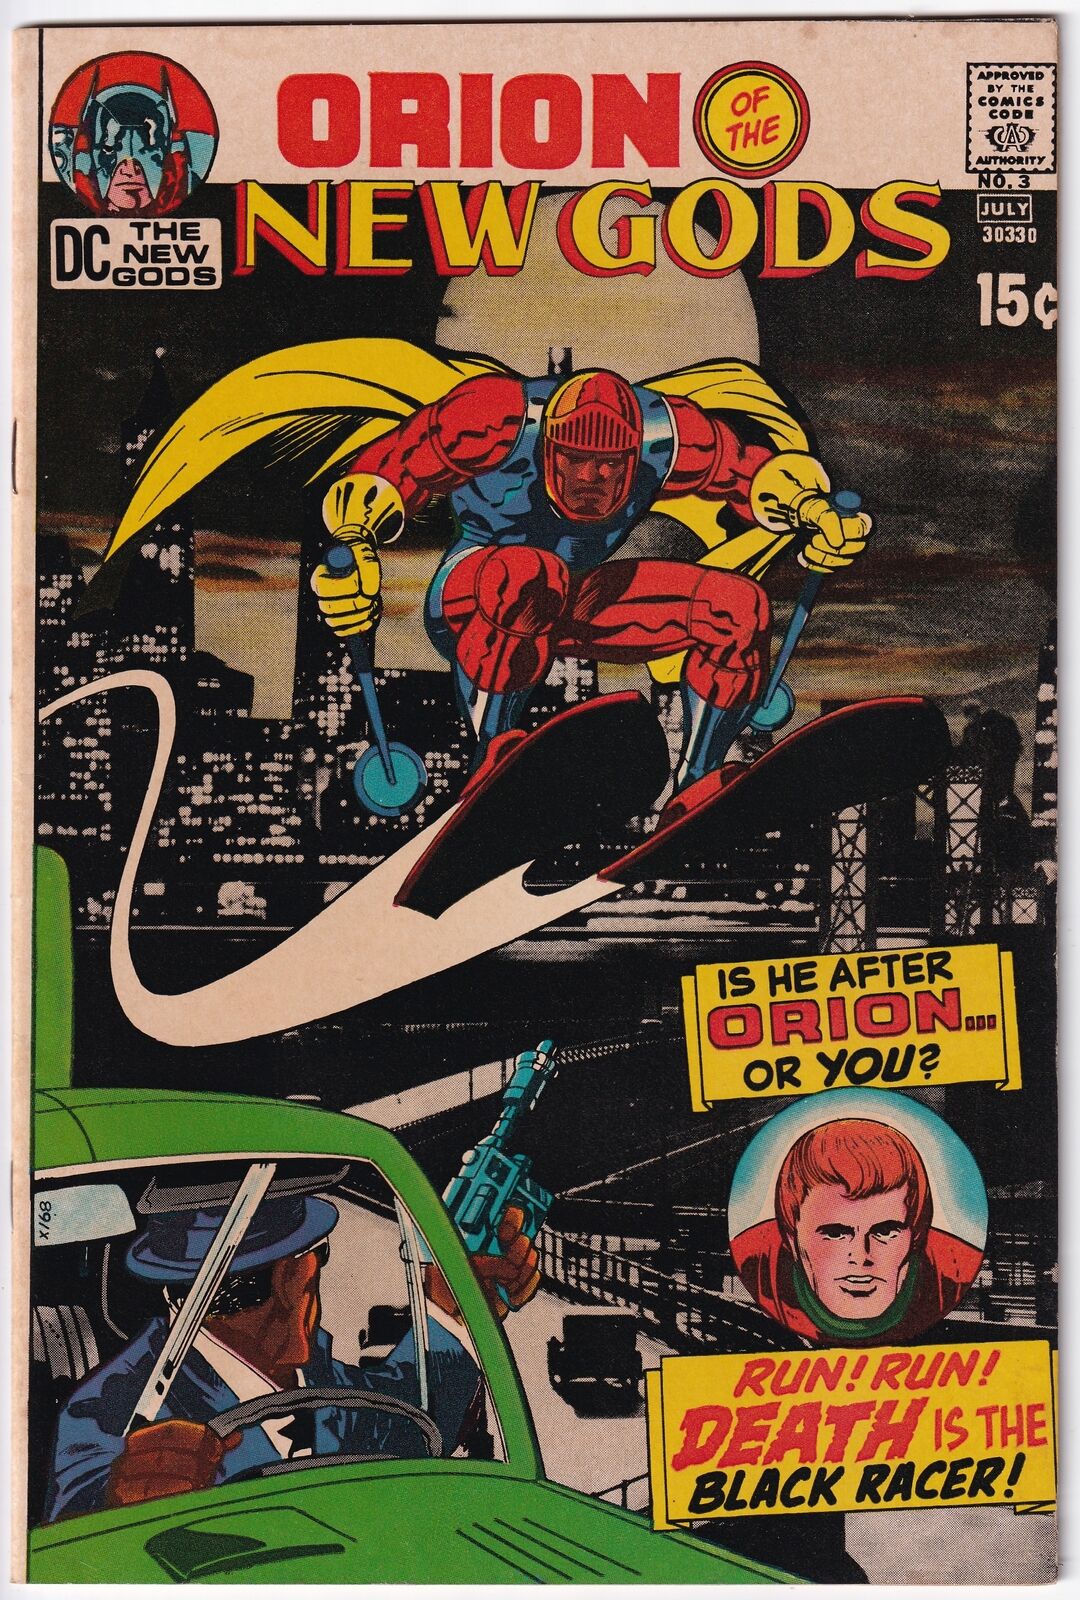 New Gods #3 (DC, 1971) 1st Appearance of Black Racer, High Quality Scans.